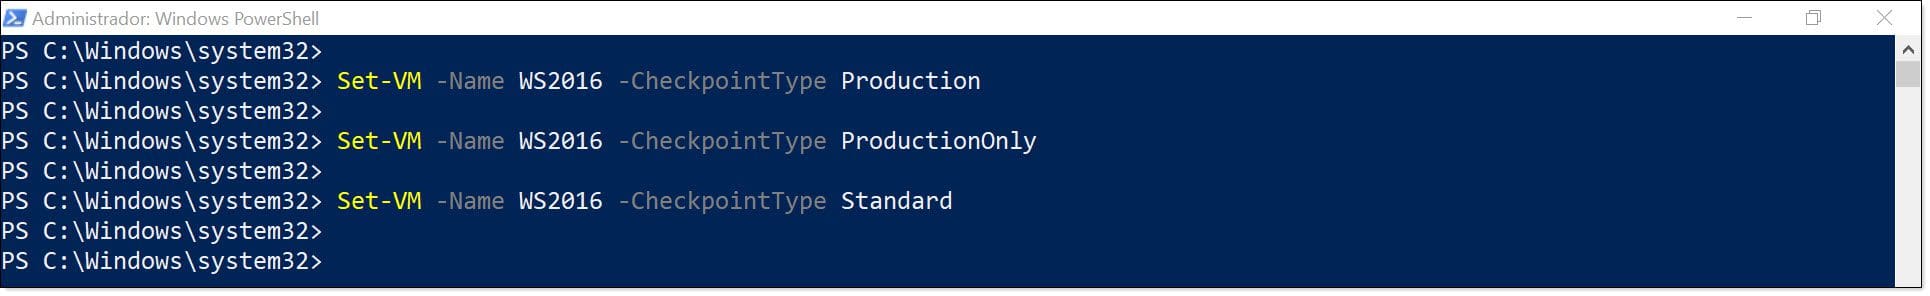 Image - Configuring different types of checkpoint in Hyper-V using PowerShell